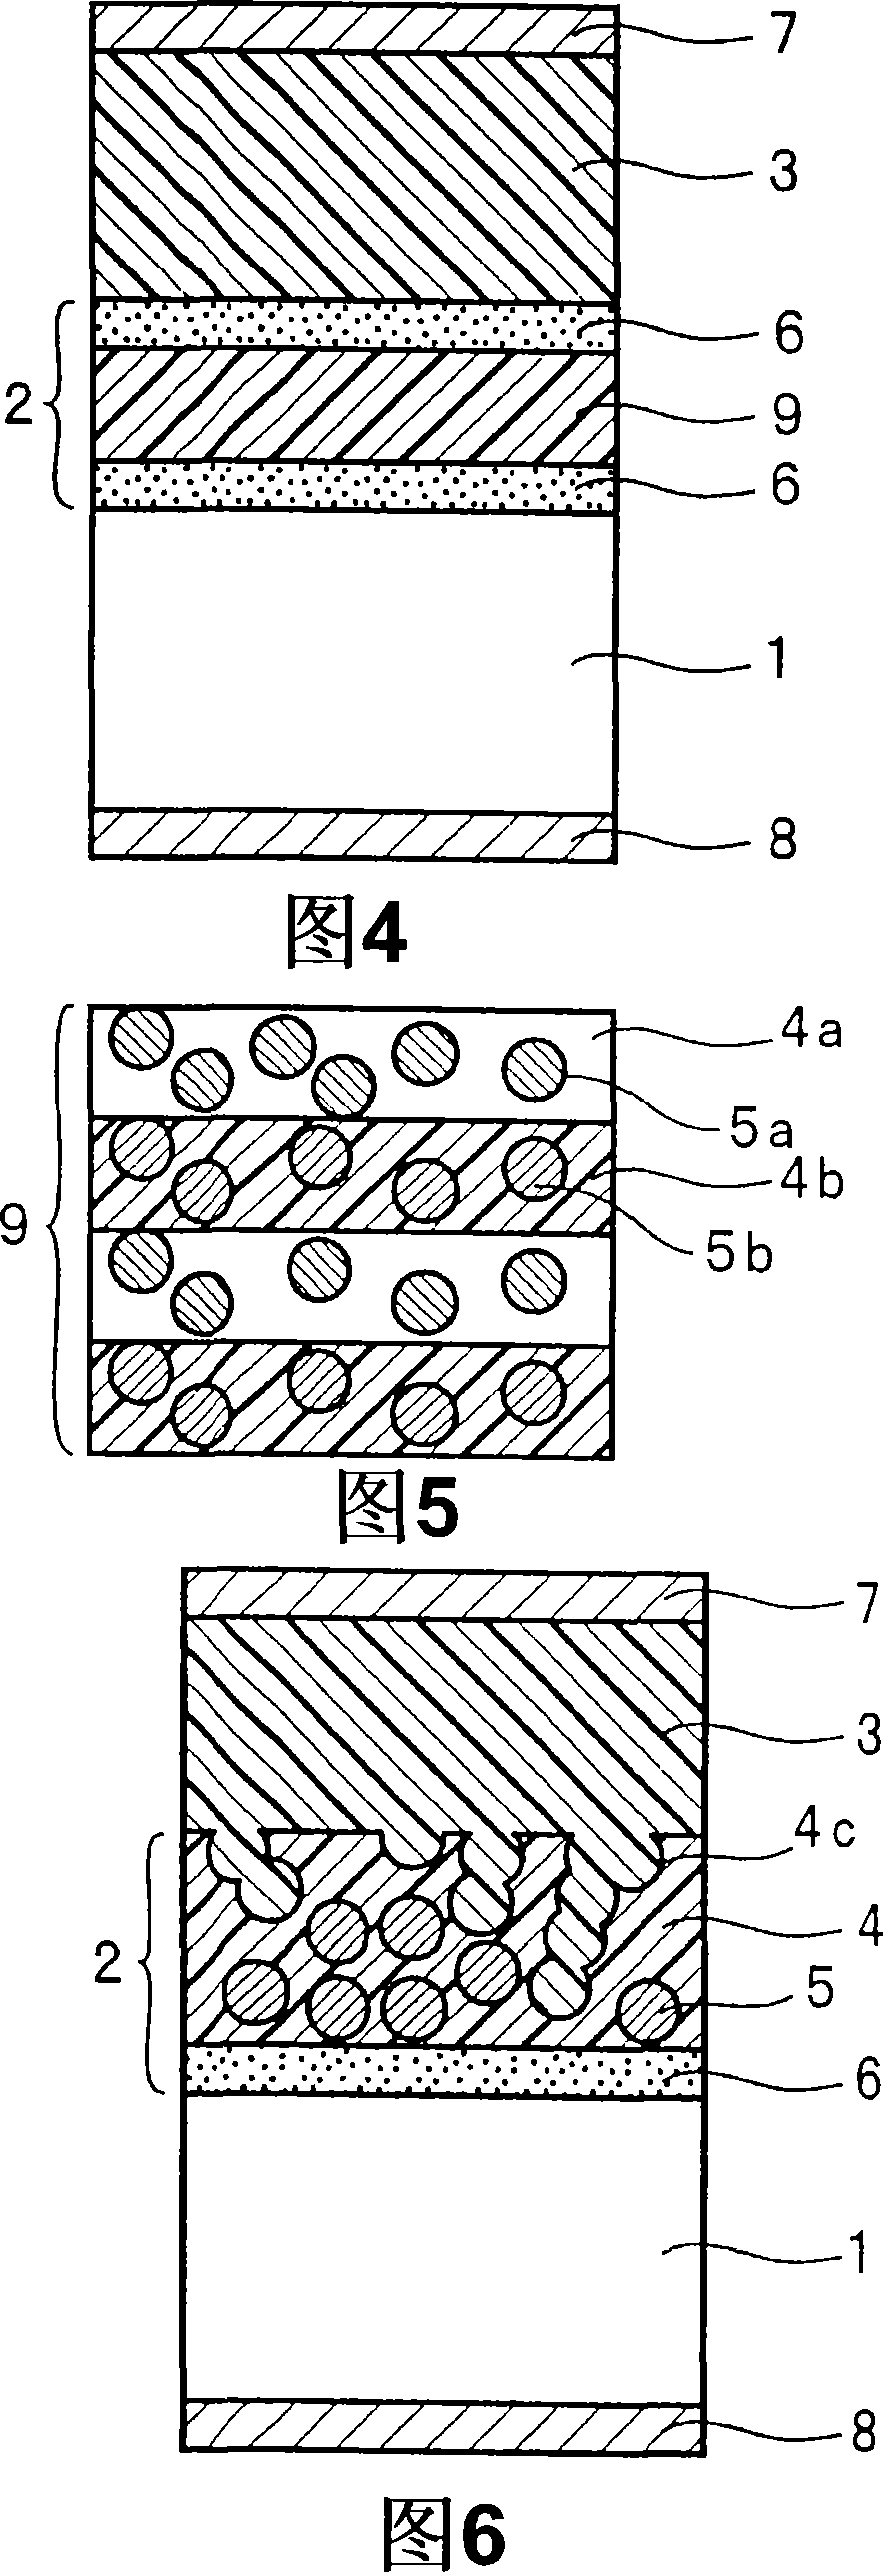 Multilayer optical device